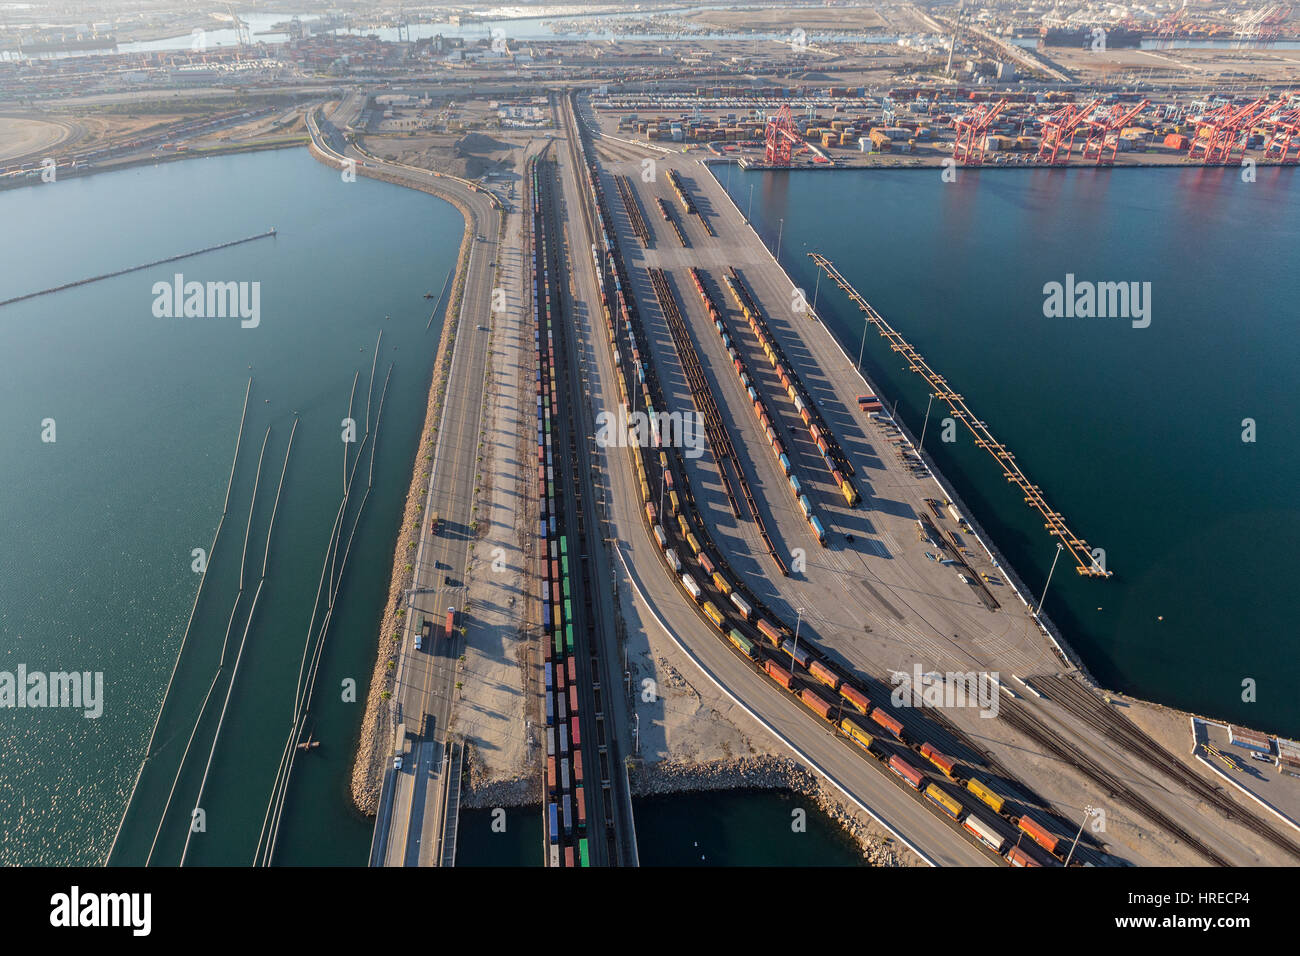 Los Angeles, California, USA - August 16, 2016:  Cargo container trains lined up at the Ports of Long Beach and Los Angeles. Stock Photo